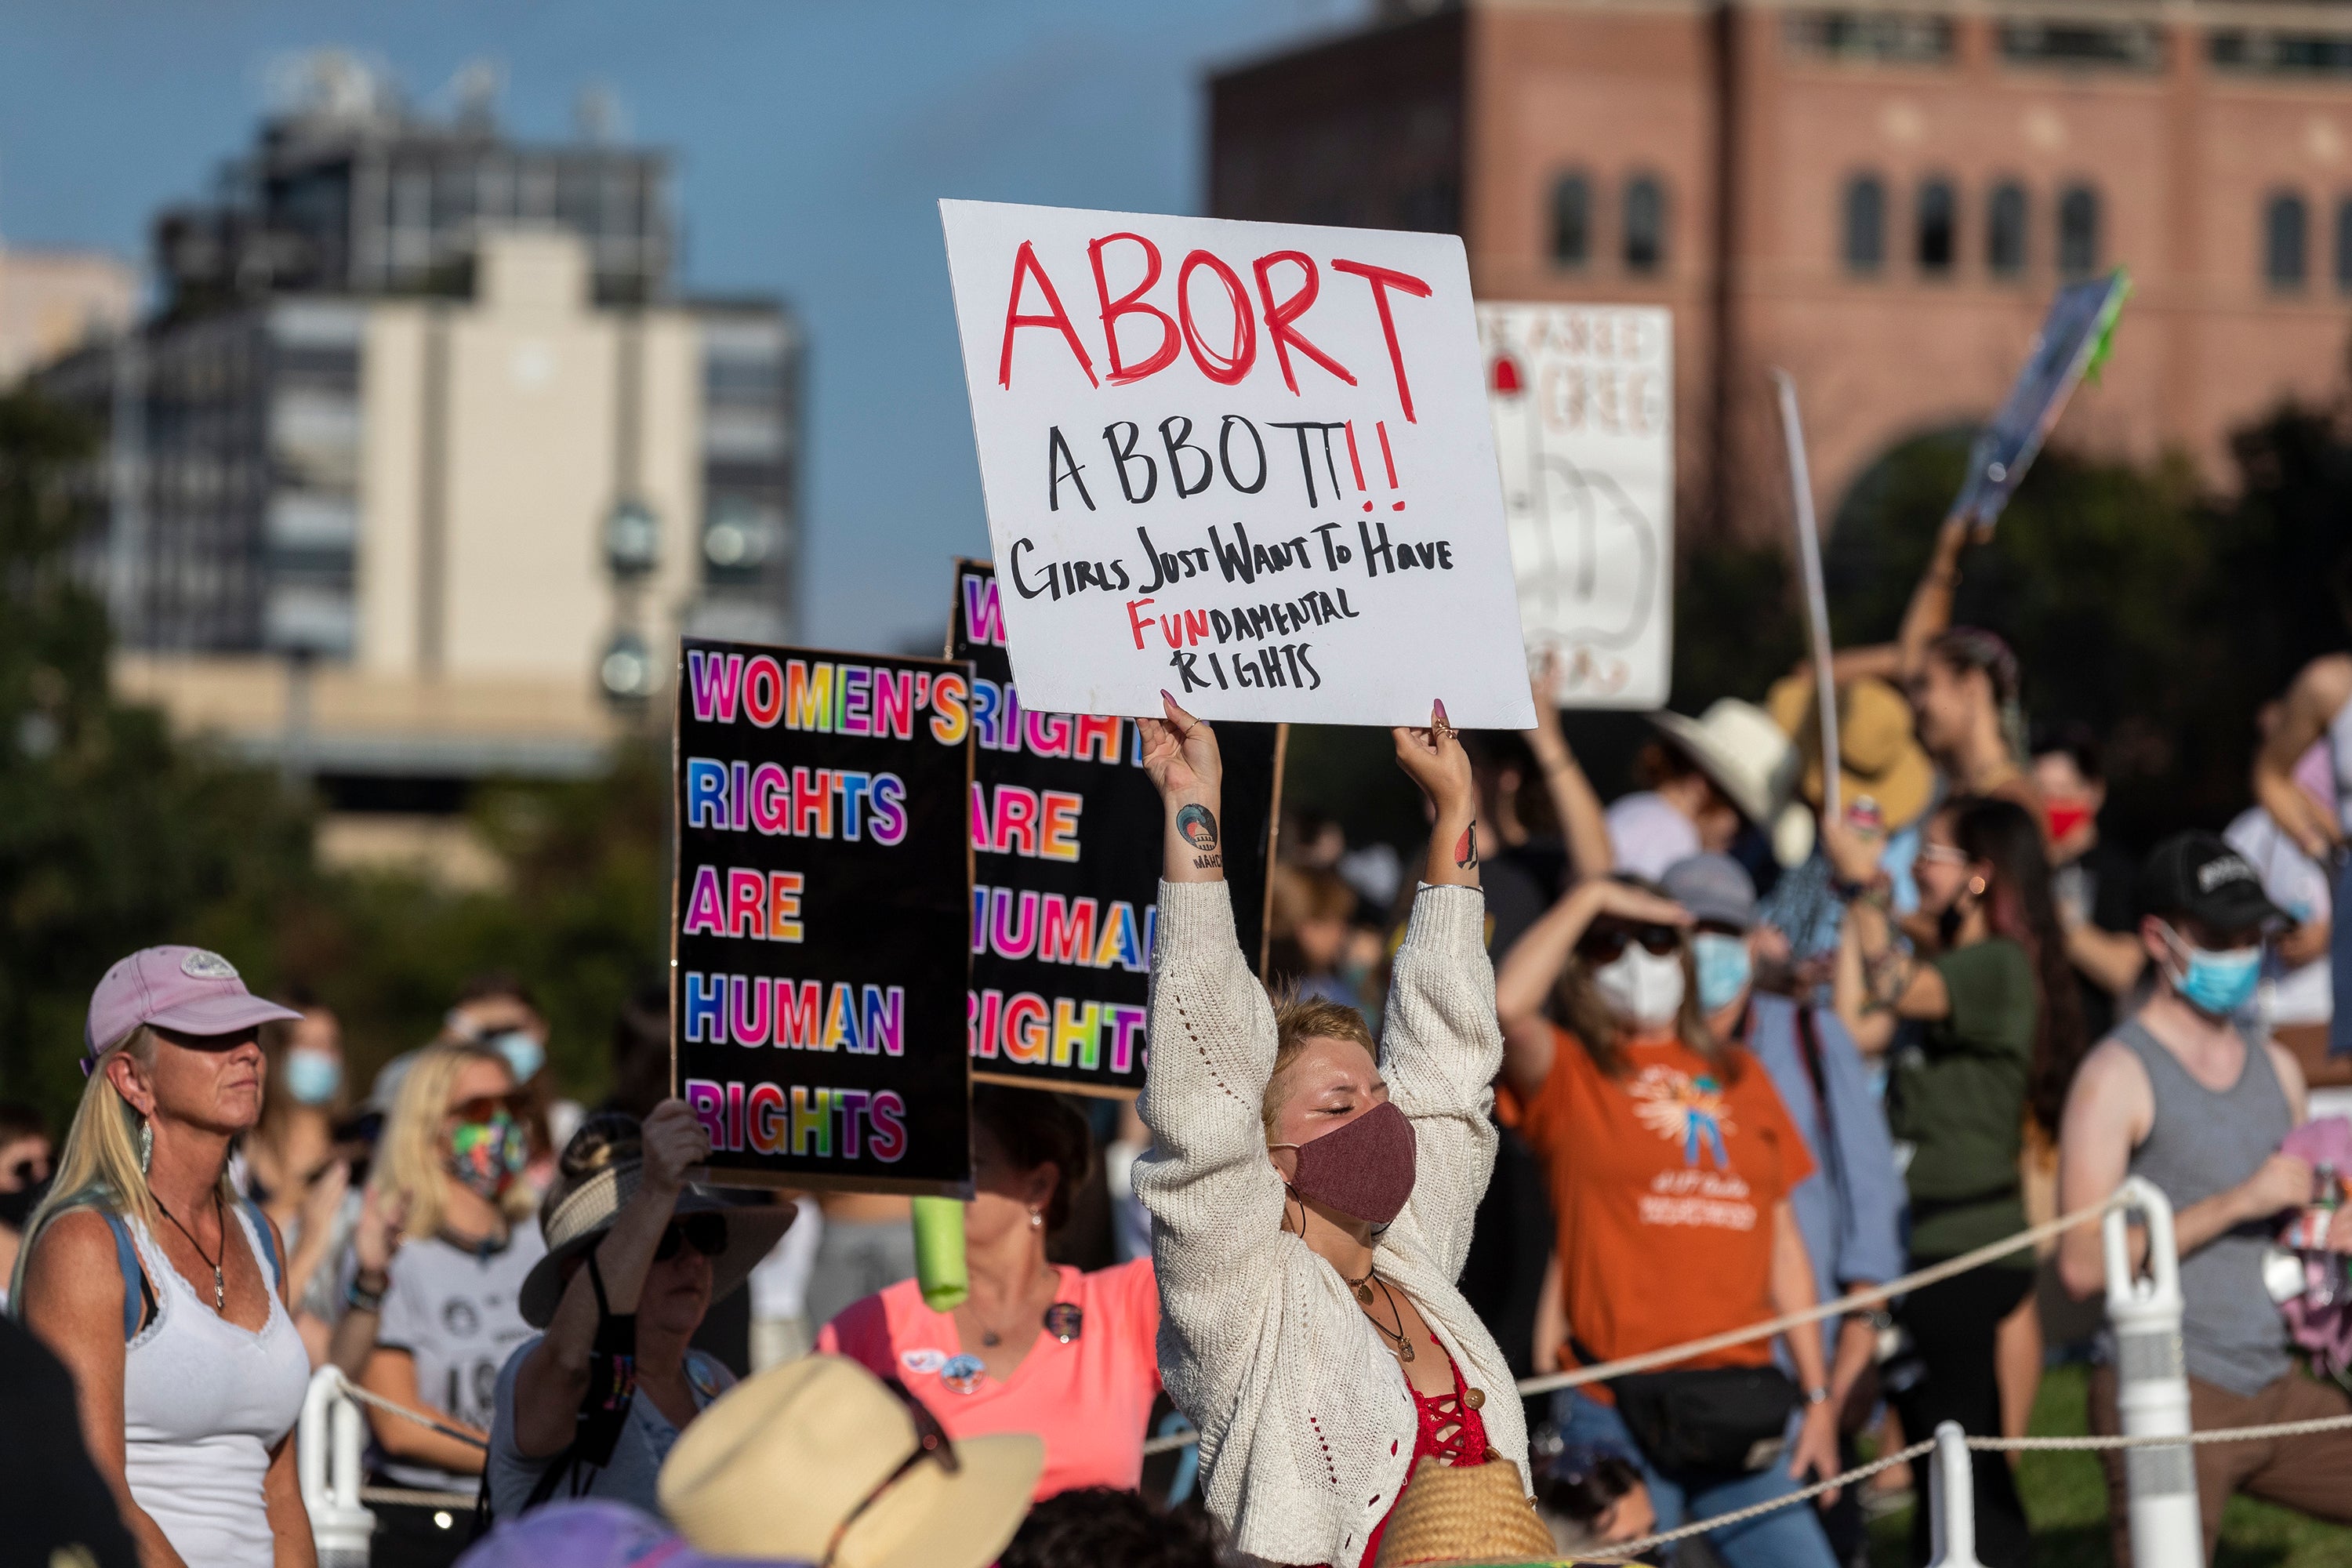 People attend the Women's March ATX rally, Saturday, Oct., 2, 2021, at the Texas State Capitol in Austin, Texas. An expected decision by the U.S. Supreme Court in the coming year to severely restrict abortion rights or overturn Roe v. Wade entirely is setting off a renewed round of abortion battles in state legislatures. (AP Photo/Stephen Spillman, File)